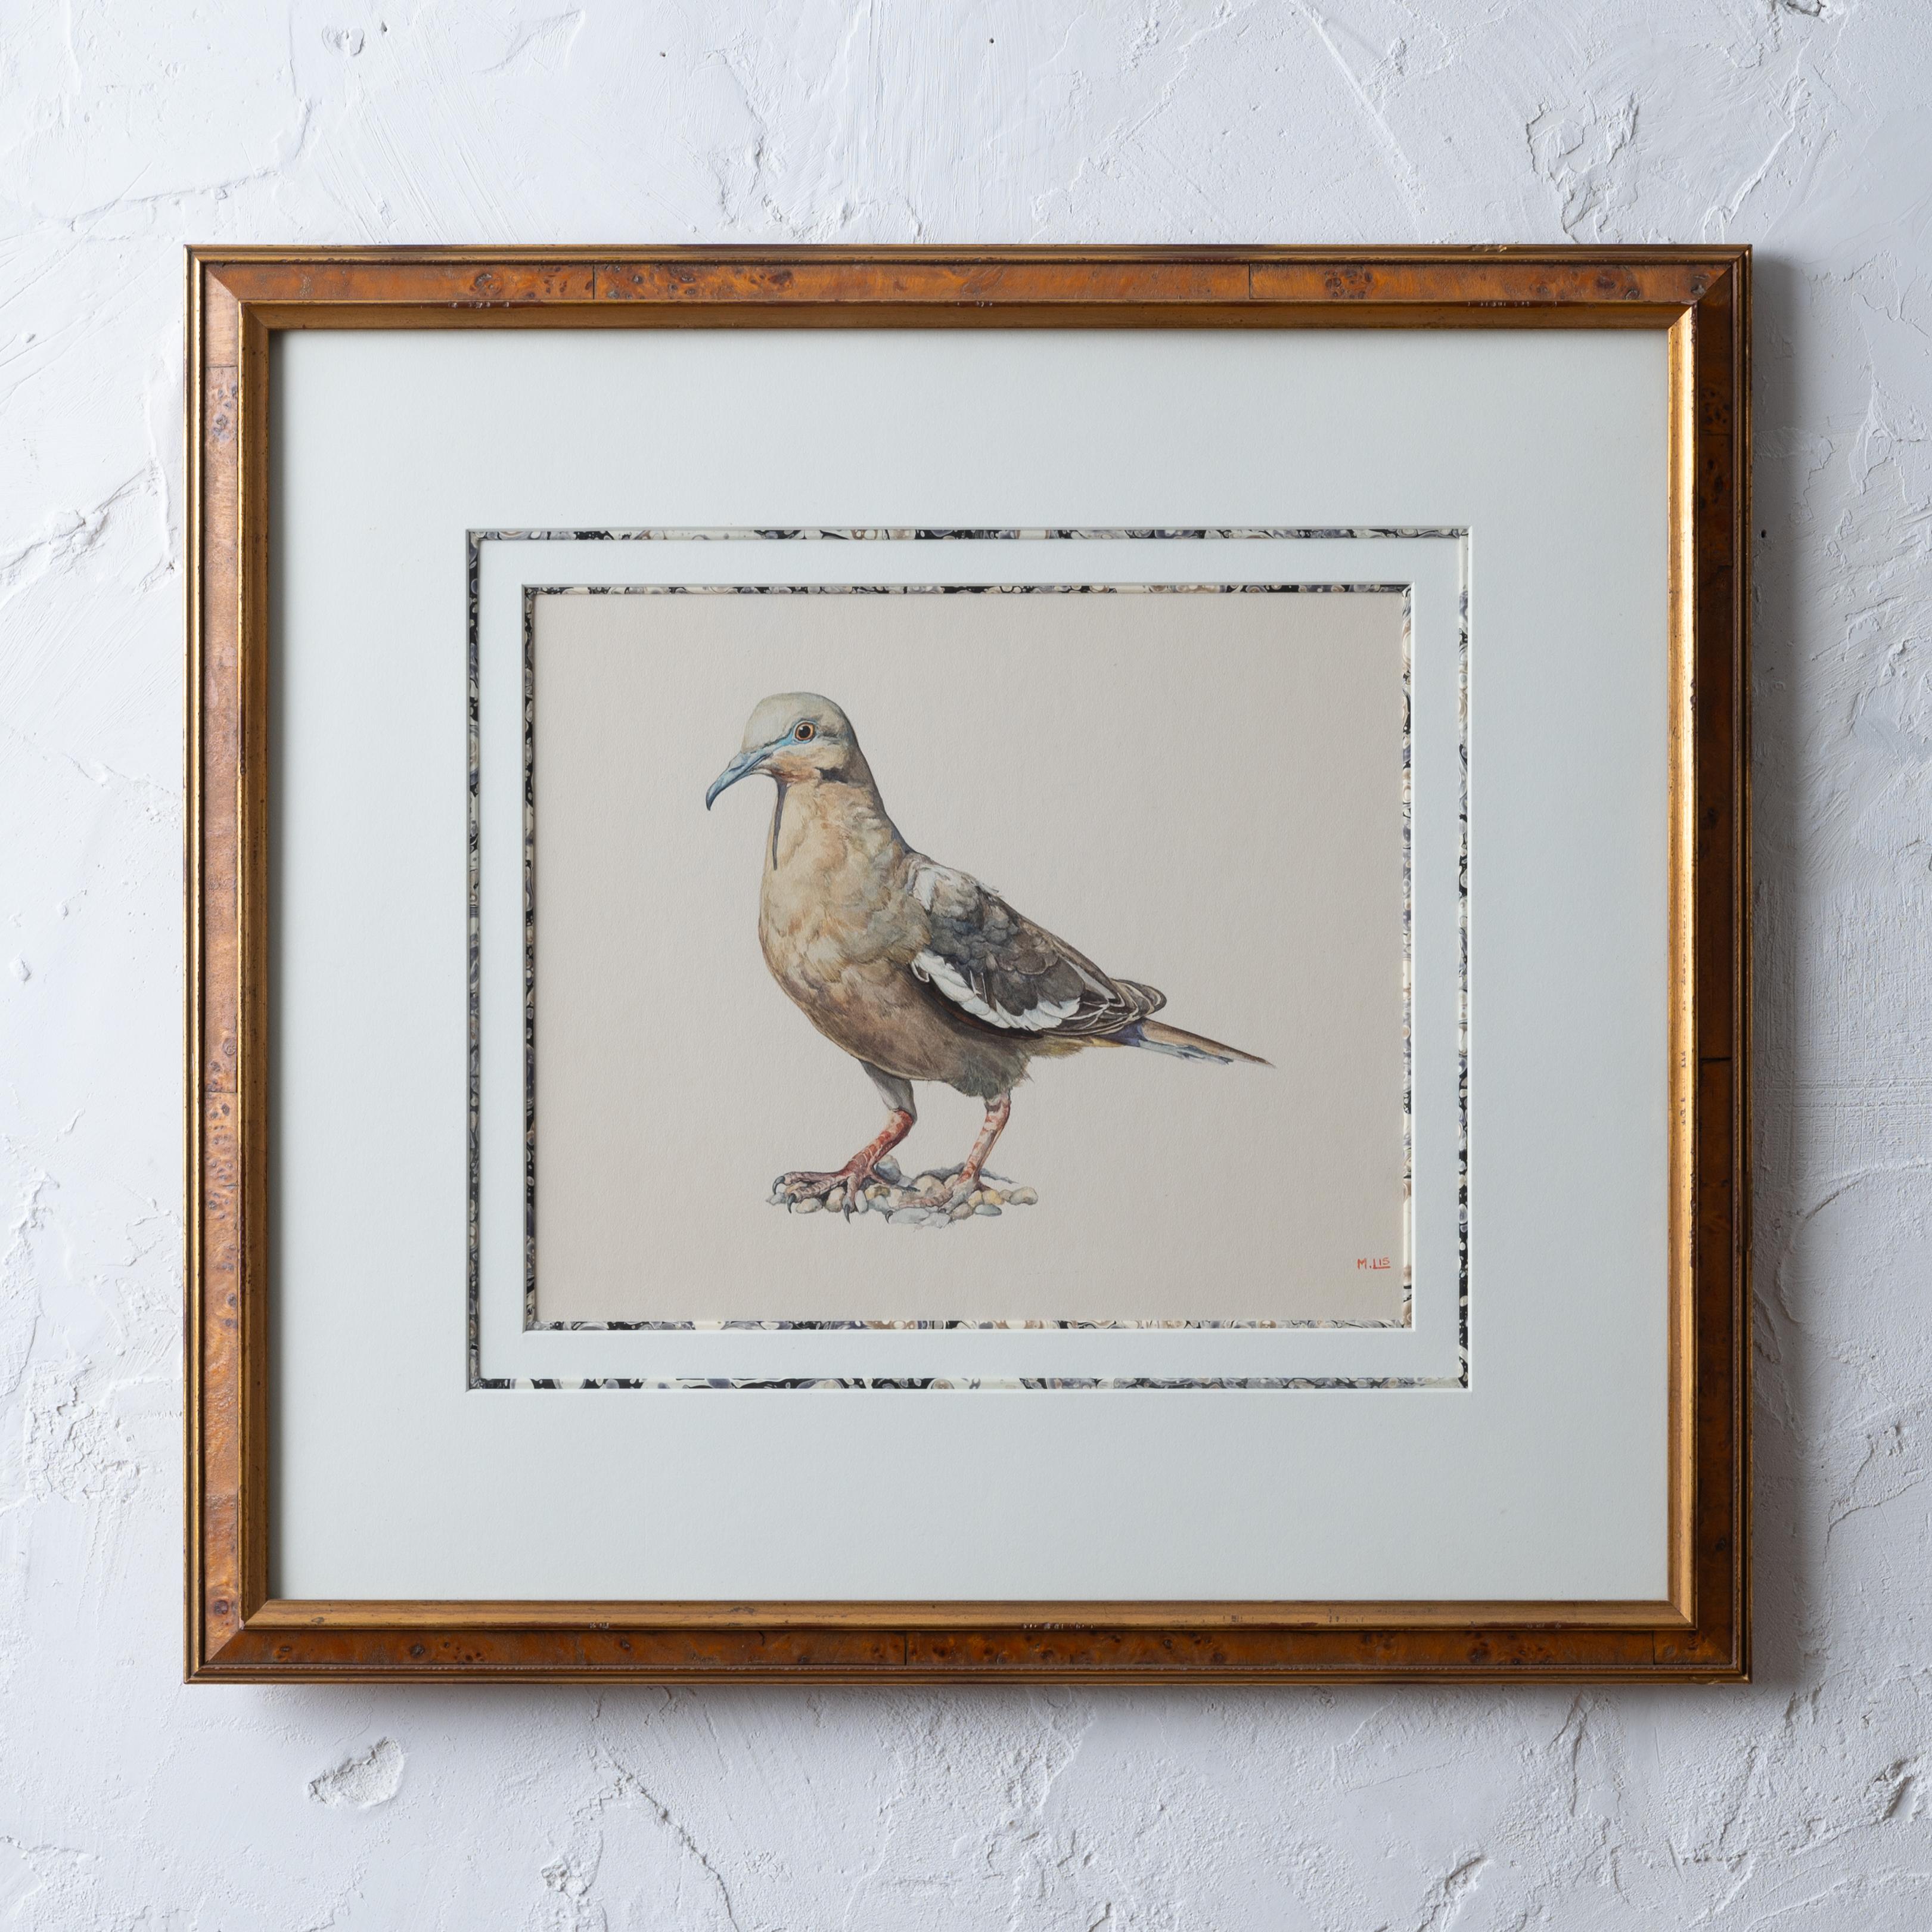 M. Lis
(20th Century)

A finely painted and framed pigeon watercolor.  

sight: 11 ¾ by 9 ¾ inches
frame: 21 ½ by 19 ¾ inches

